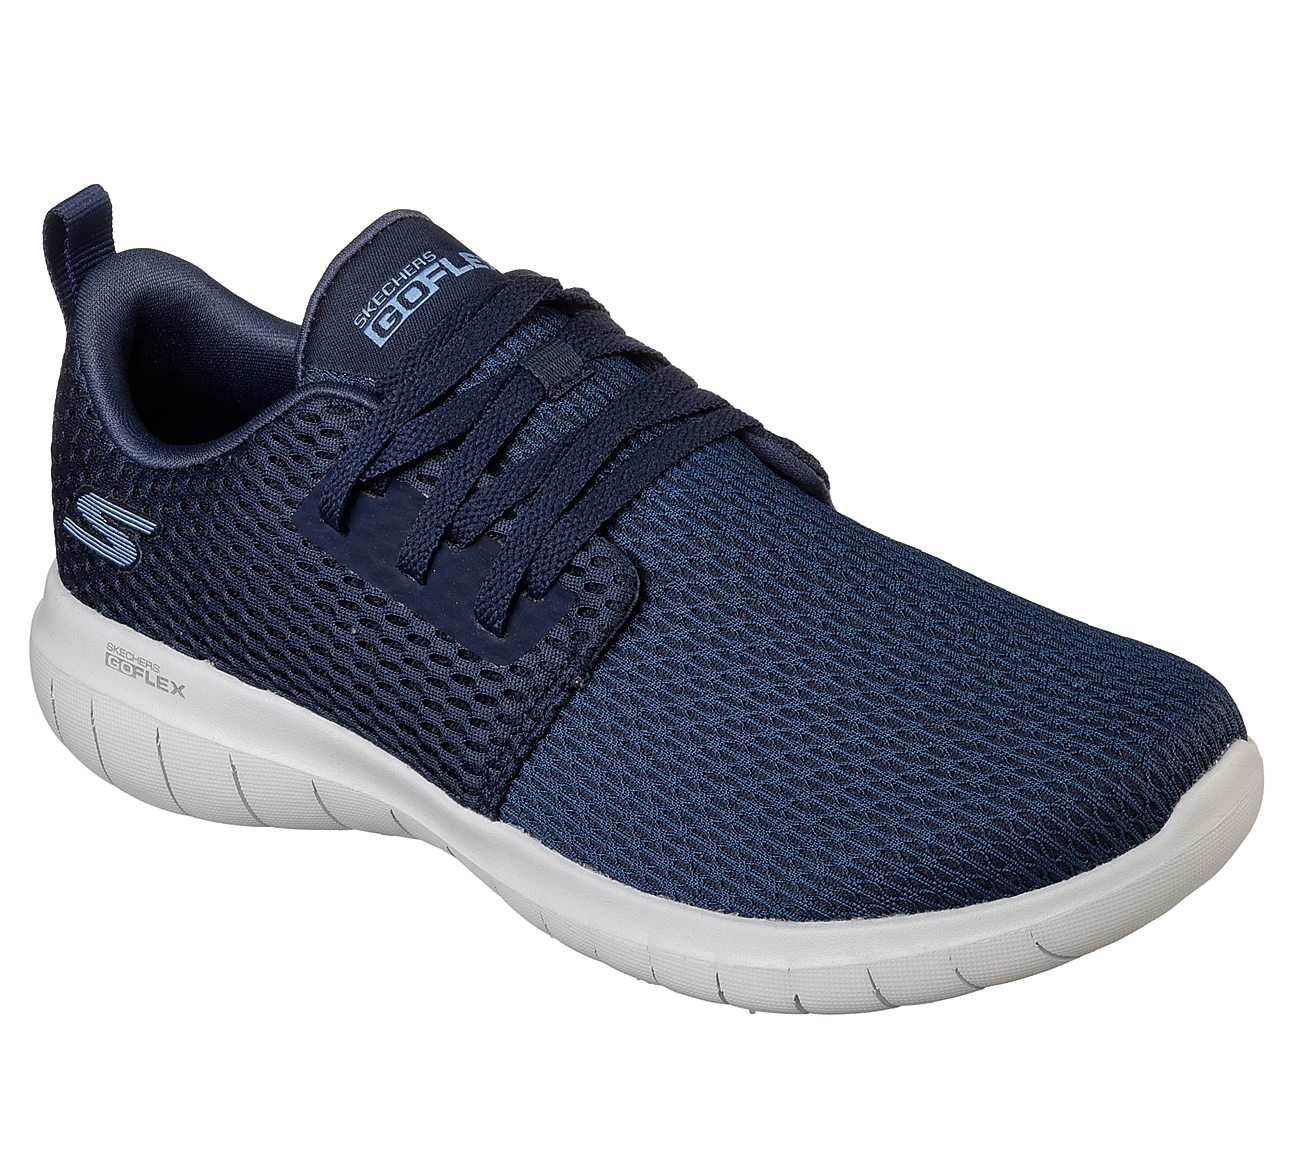 GO FLEX MAX- STRENGTH, NAVY/BLUE Footwear Lateral View